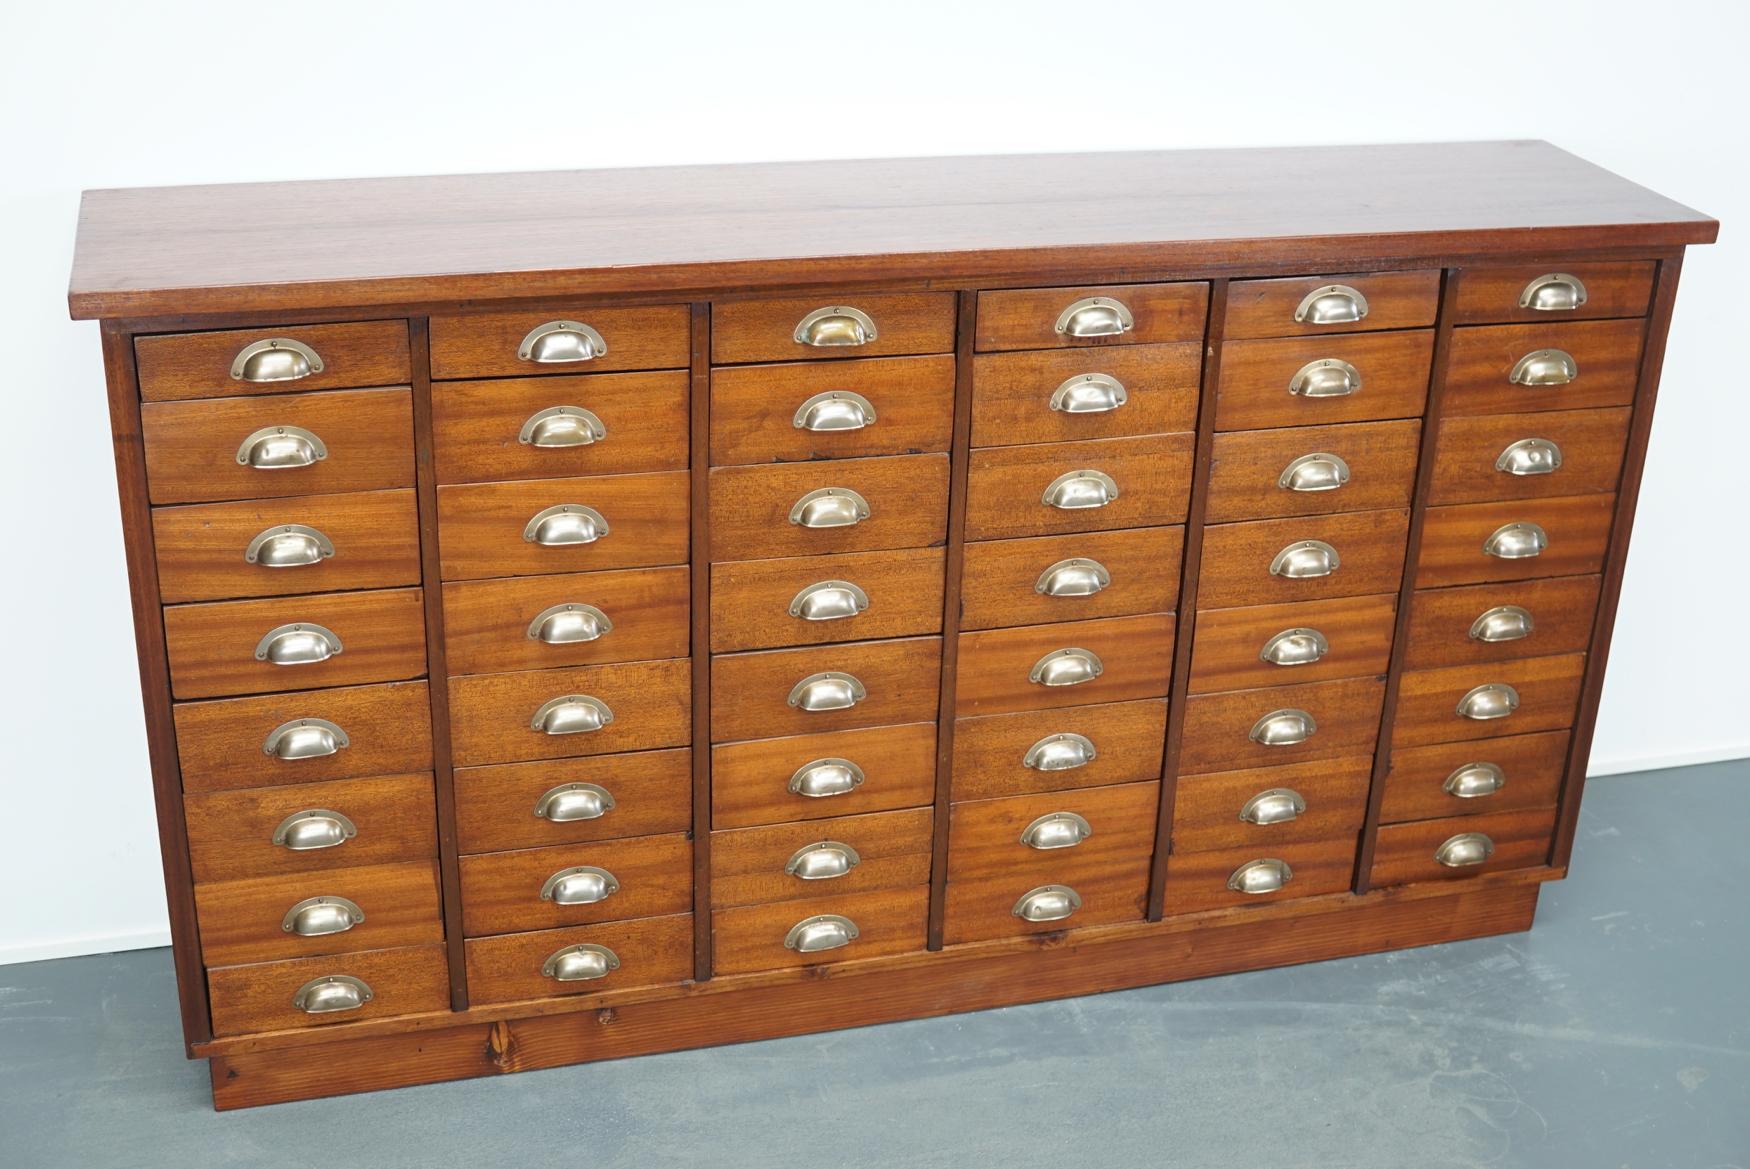 This vintage mahogany bank of drawers dates from the 1930s and was made in England. It features a solid wooden frame and drawers in mahogany with metal cup handles.
  